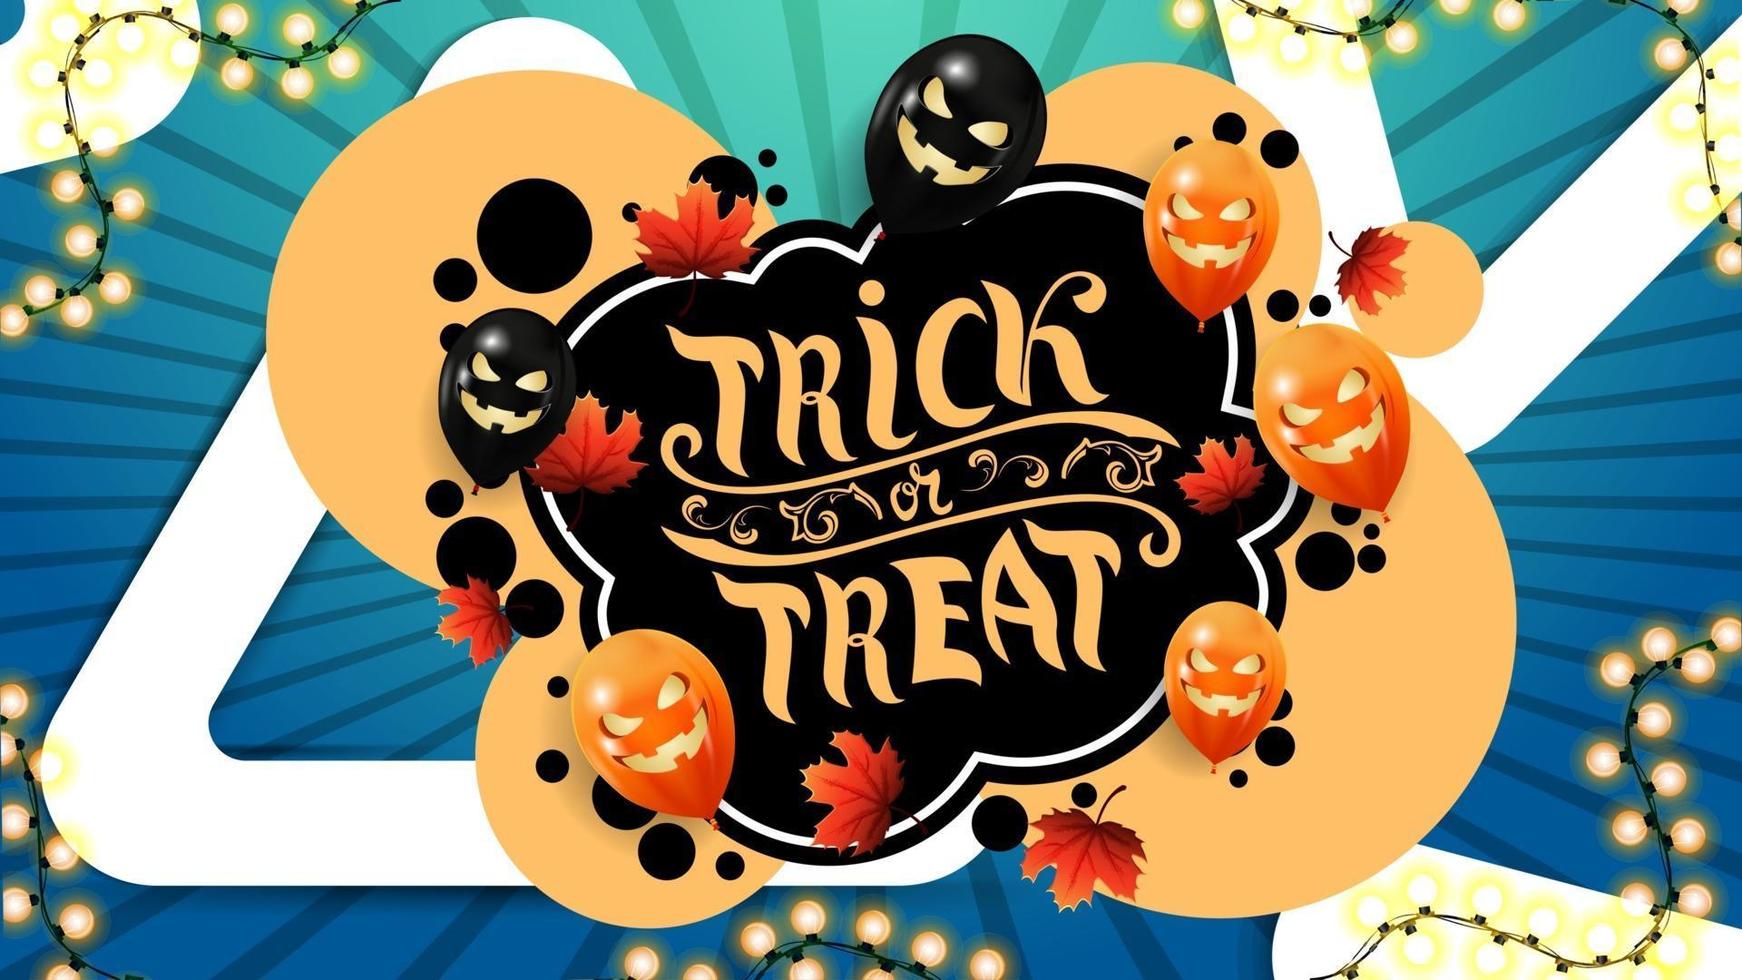 Trick or treat, creative greeting postcard with graffiti style. Template with bubbles, autumn leafs, Halloween balloons and creative background with triangles vector